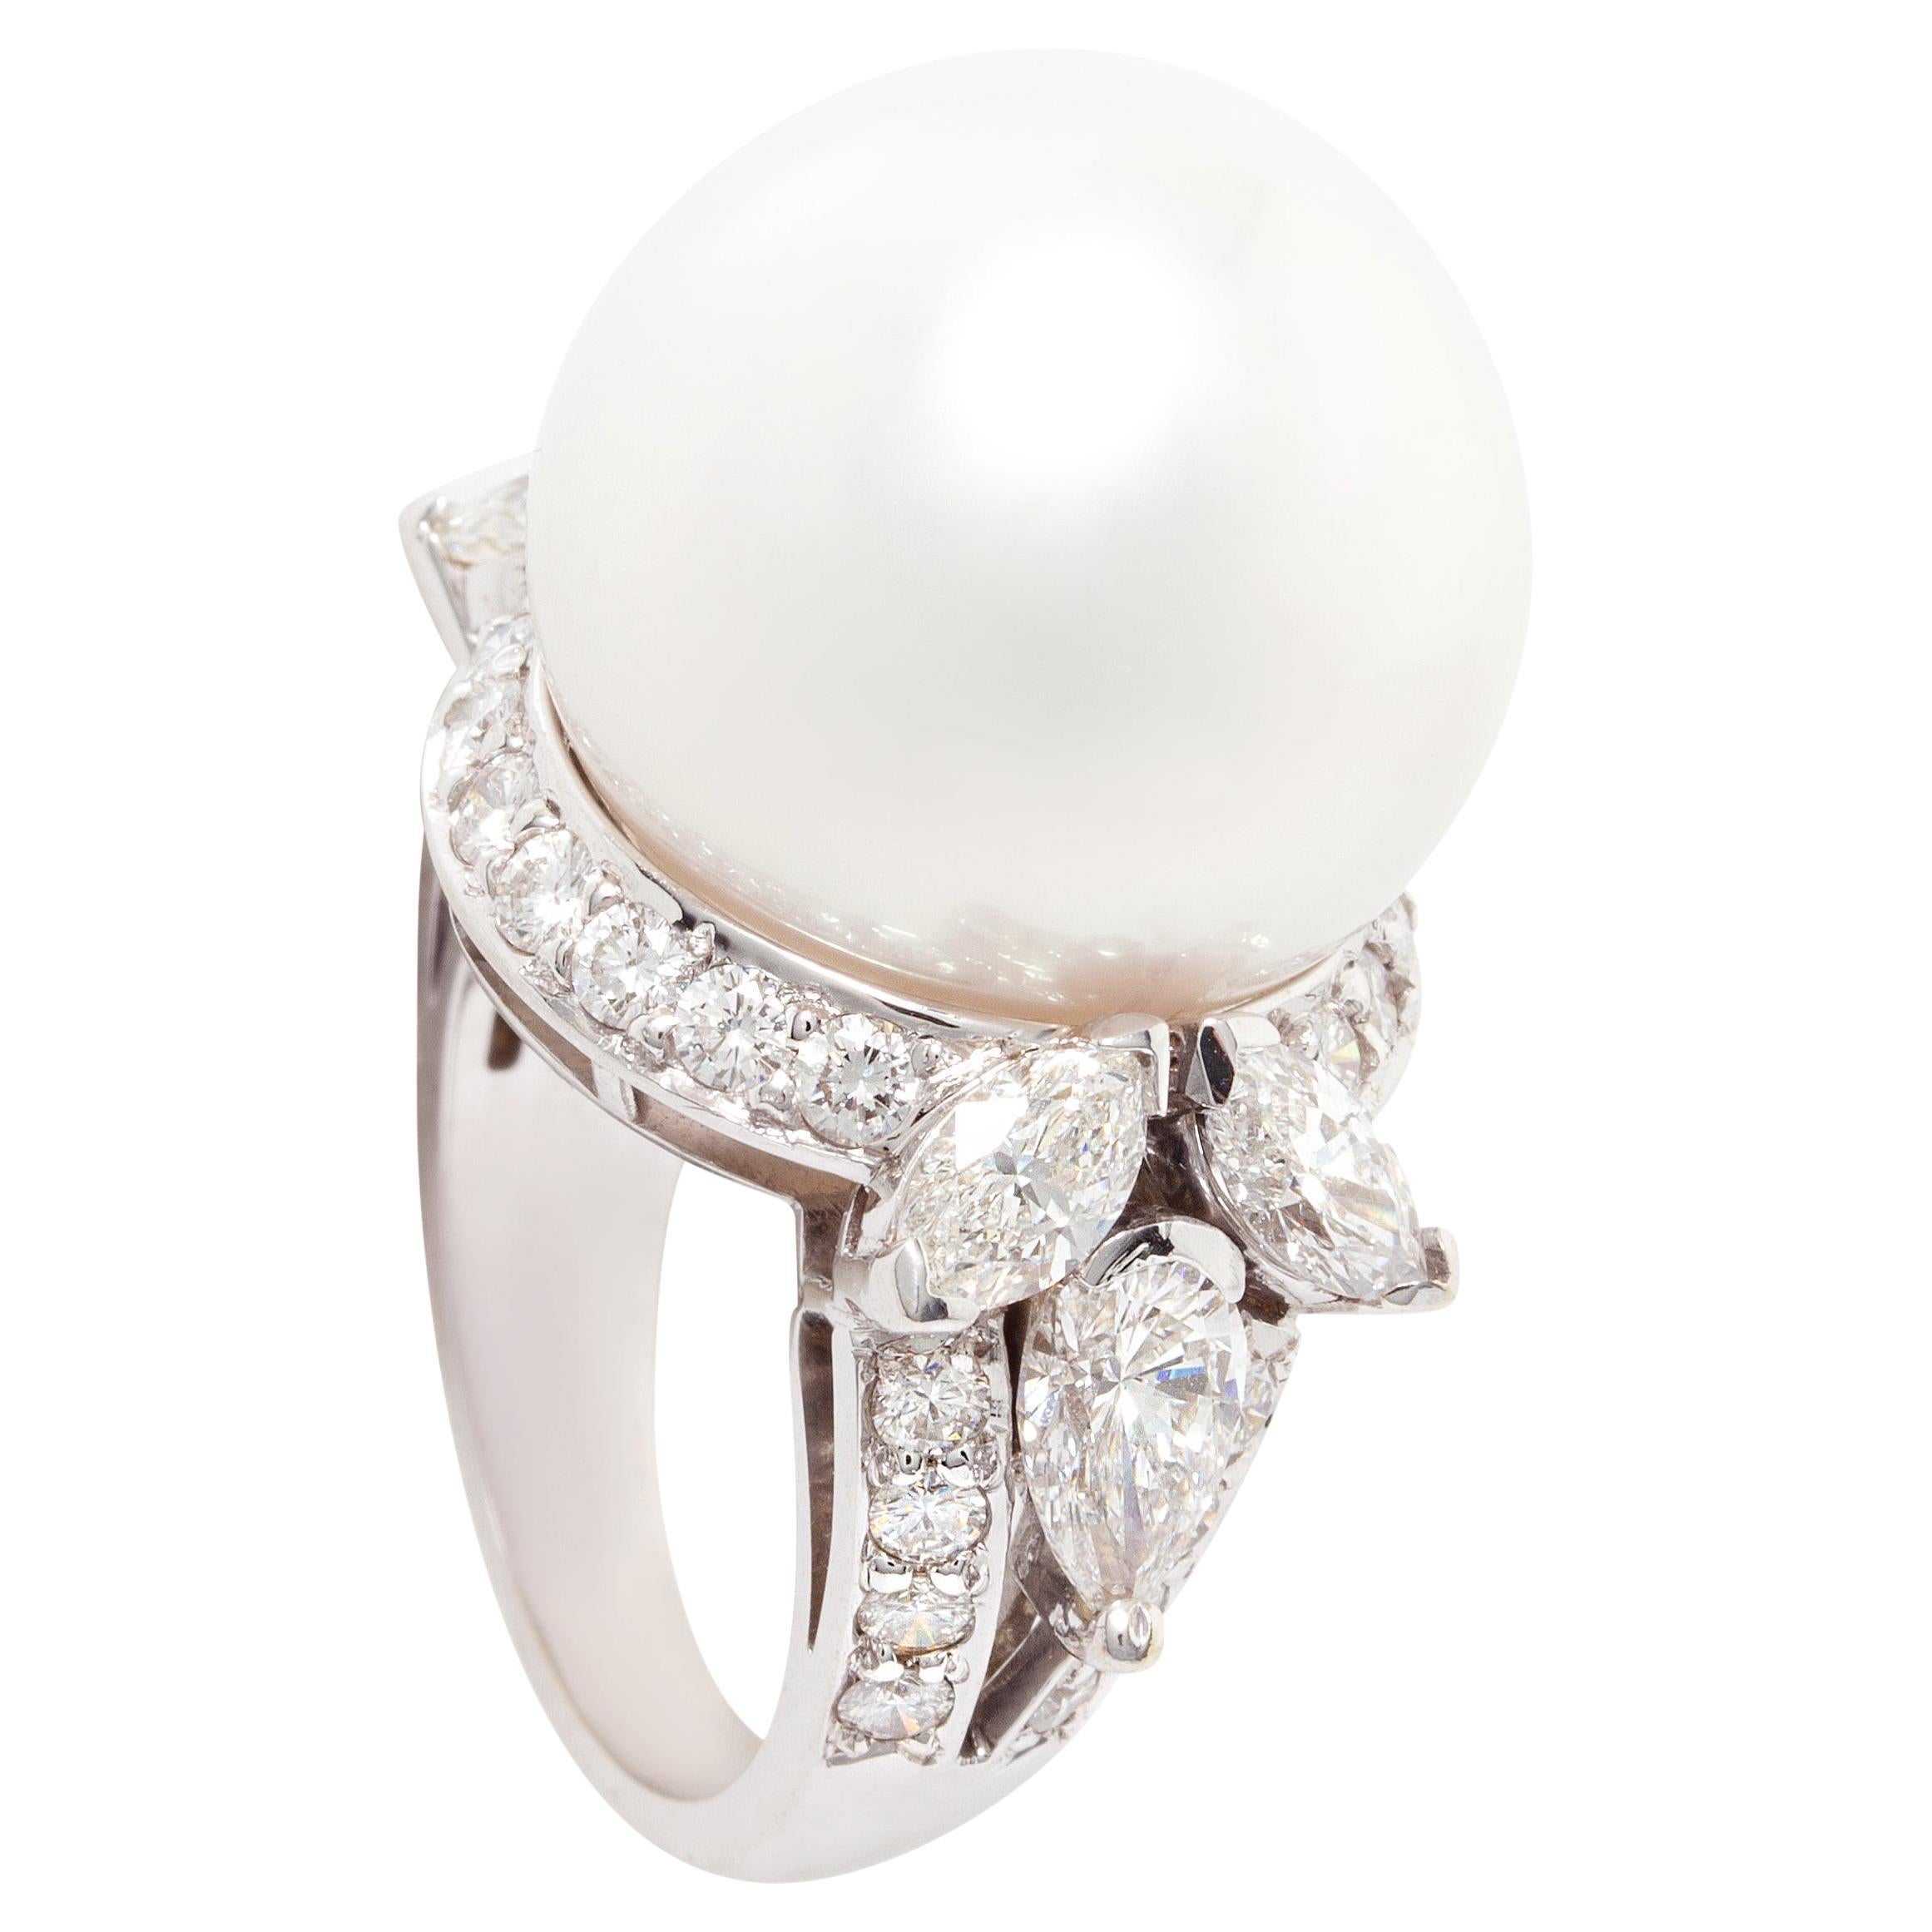 Ella Gafter 18mm South Sea Pearl Diamond Cocktail Ring For Sale